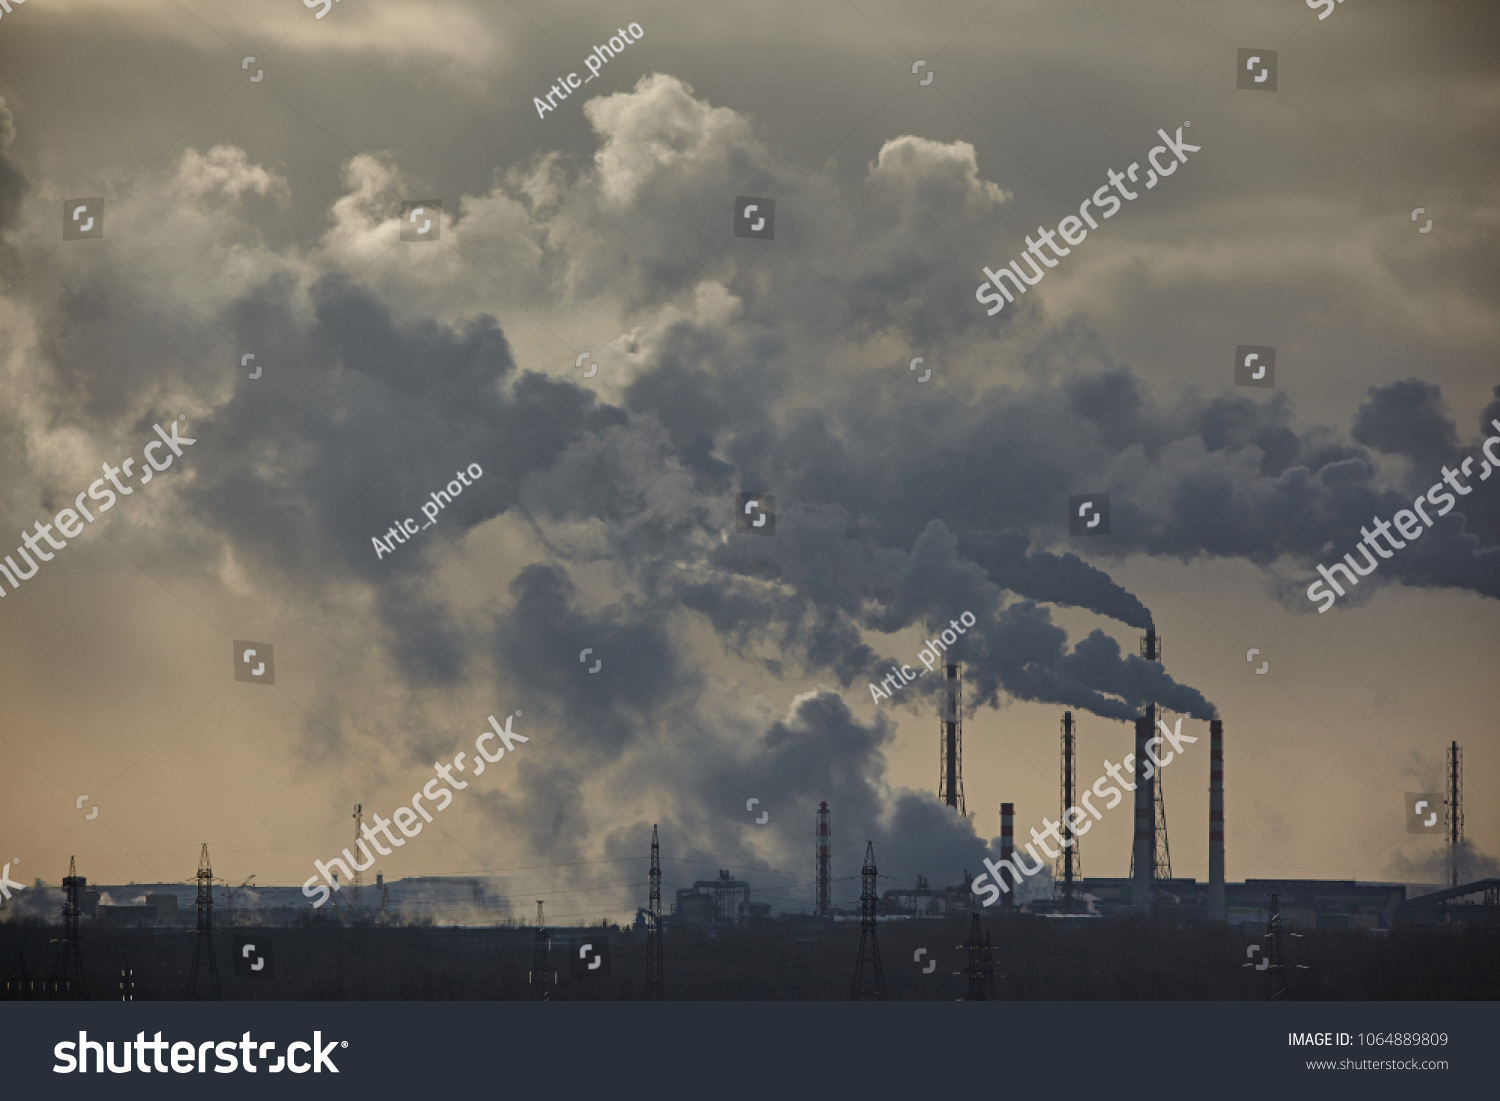 The plant emits smoke and smog from the pipes at mist cloudy, pollutants enter the atmosphere. Environmental disaster. Harmful emissions into. Exhaust gases. Chemical industry against the sky. #1064889809